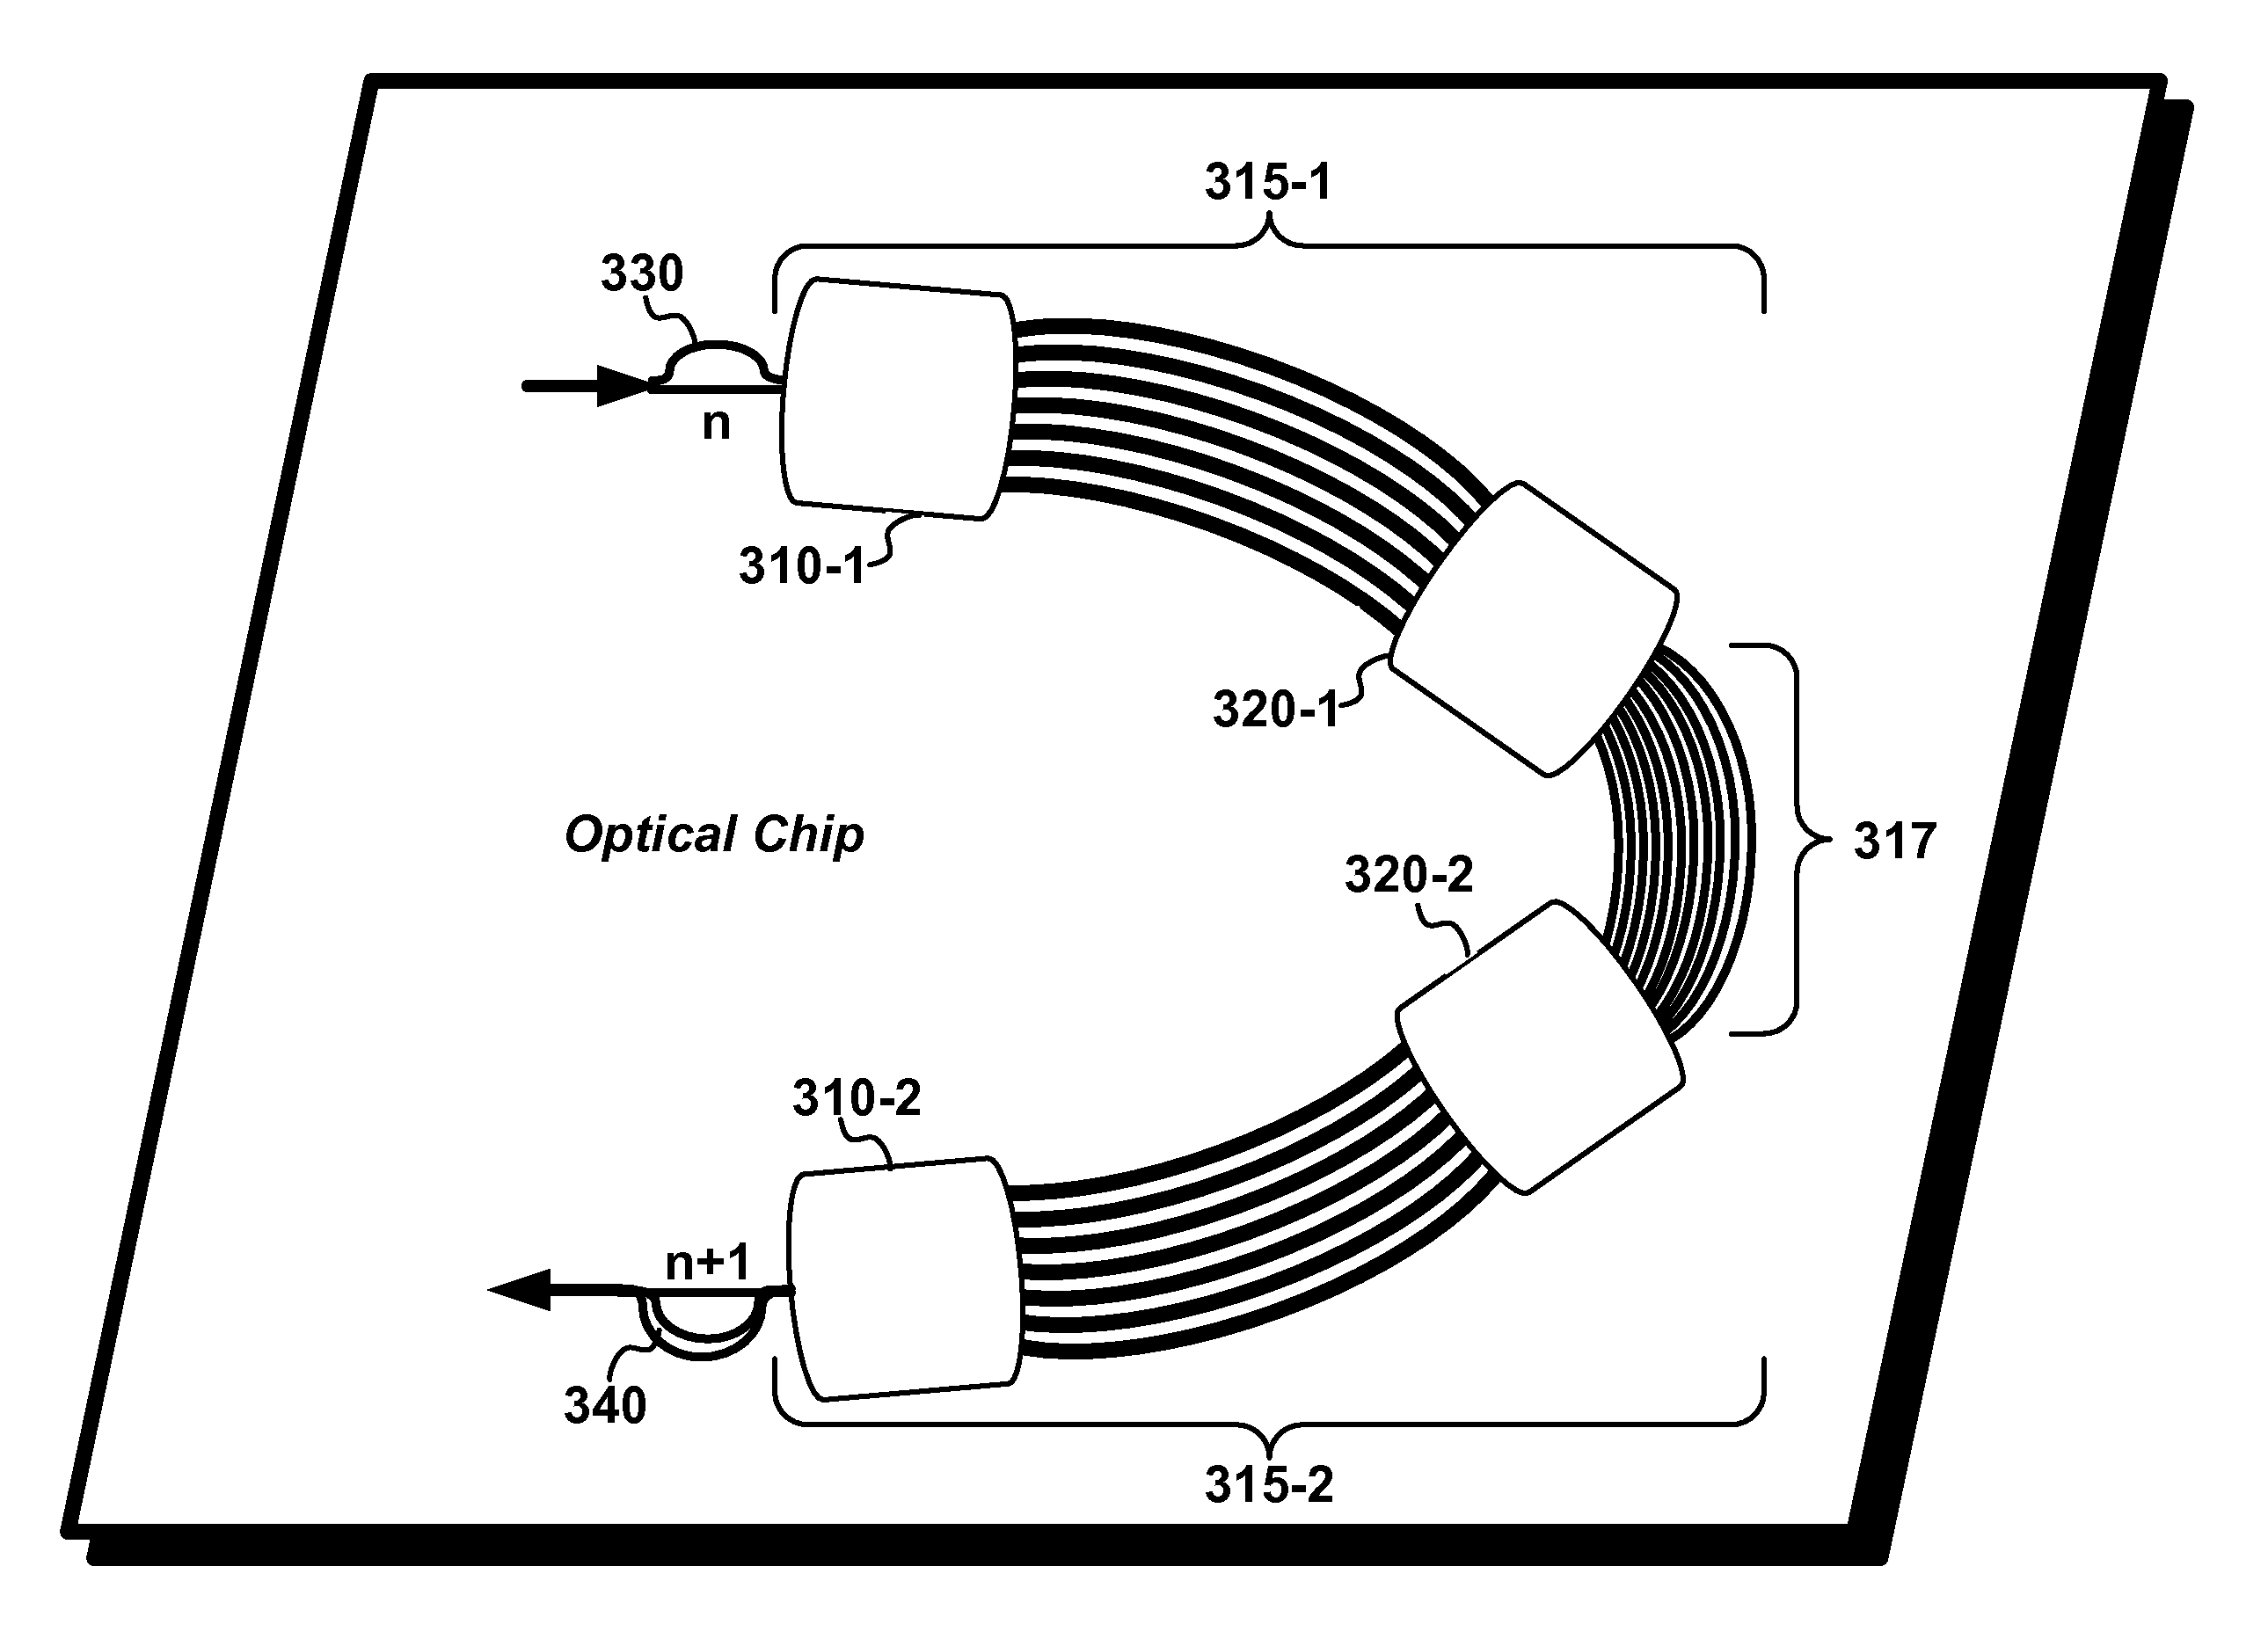 Low-ripple optical device